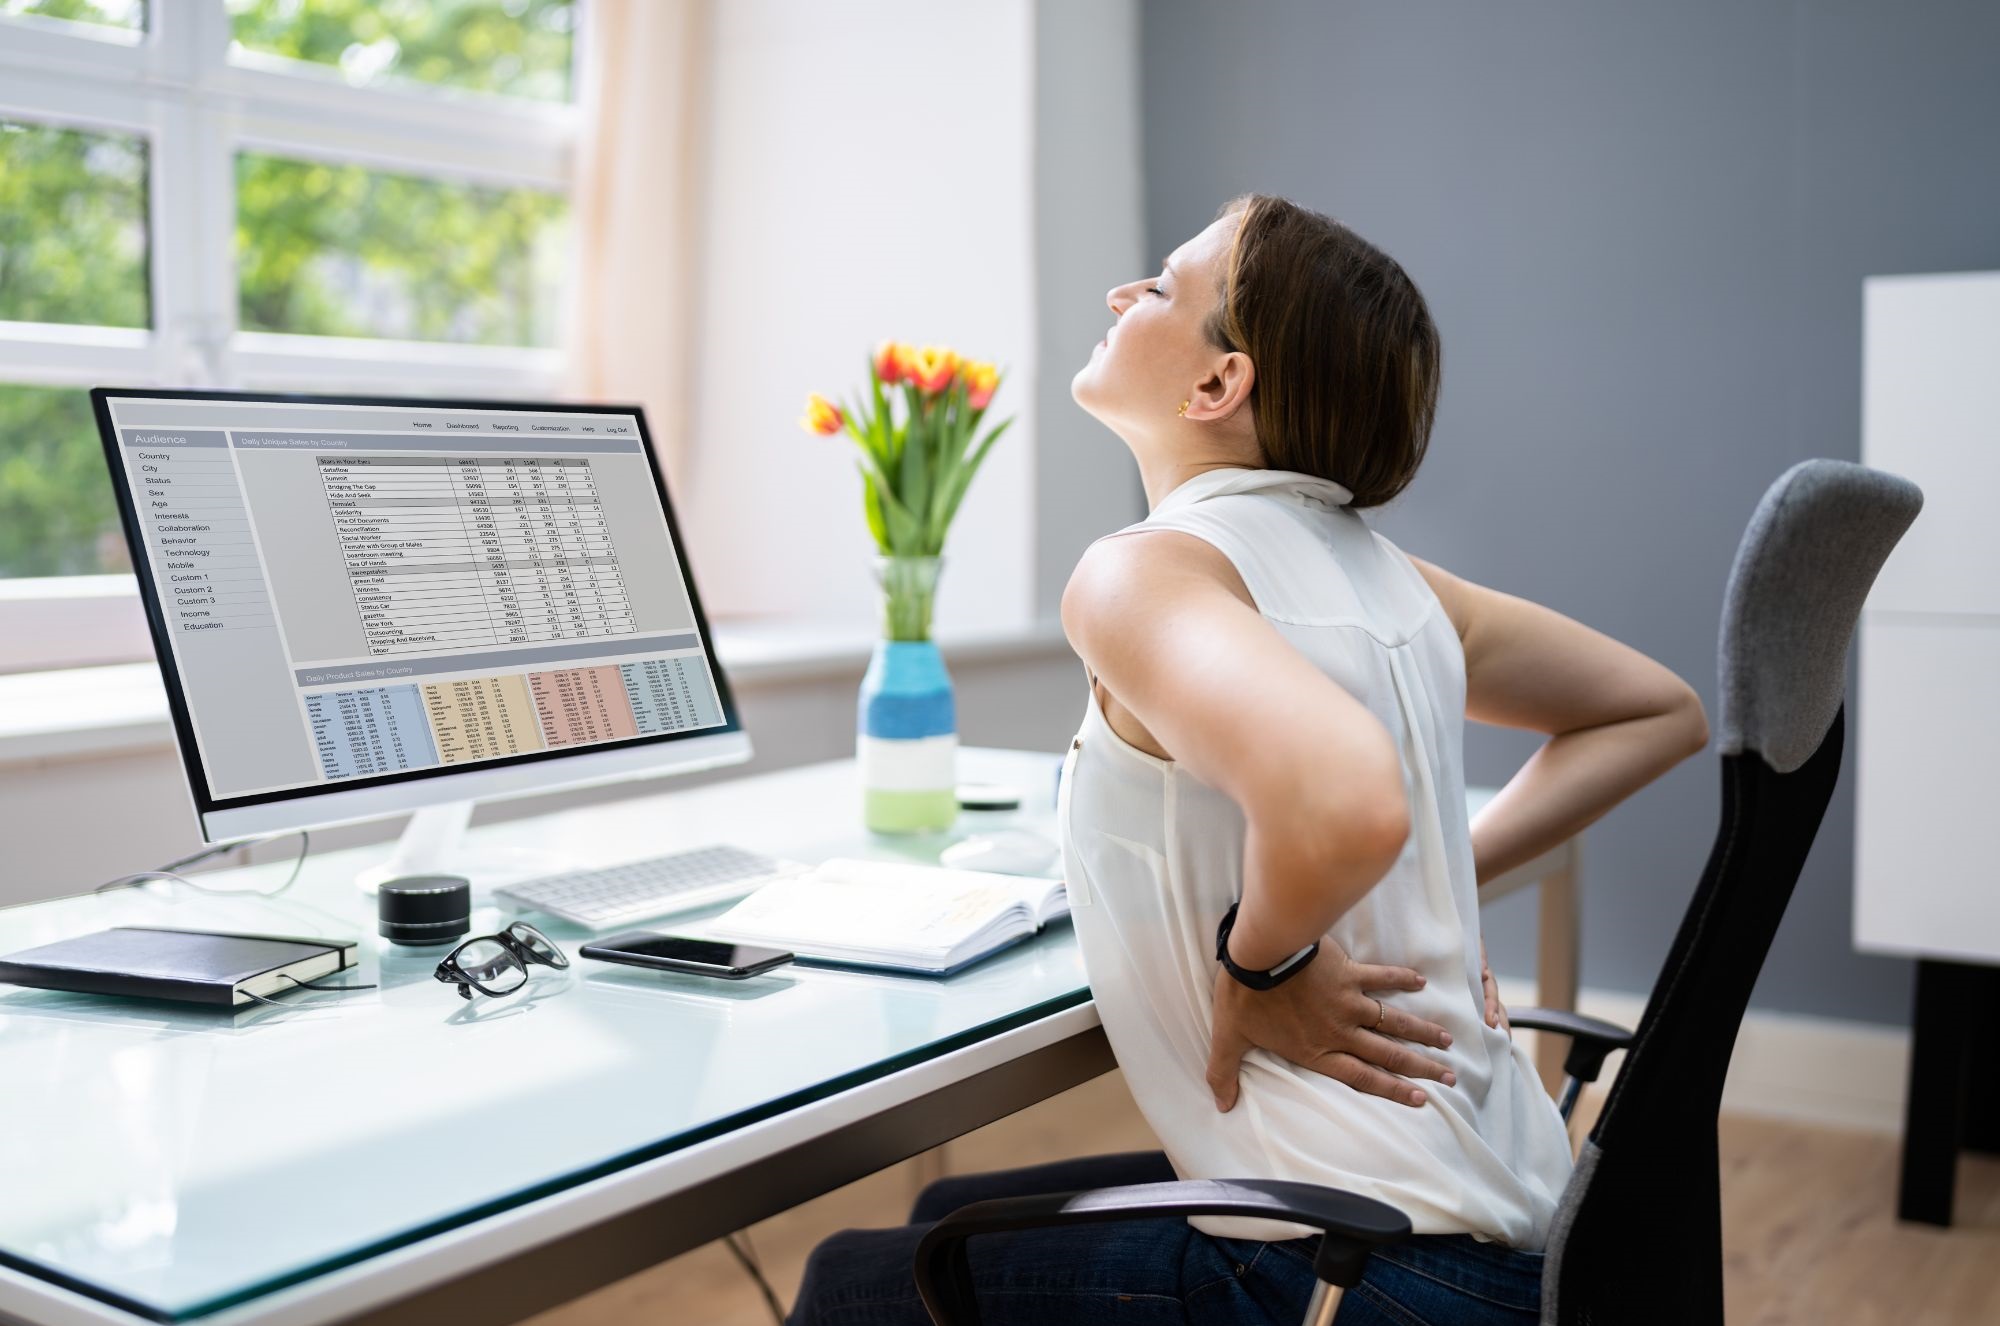 Can Stress Cause Back Pain And Stop You From Keeping Healthy And Active?